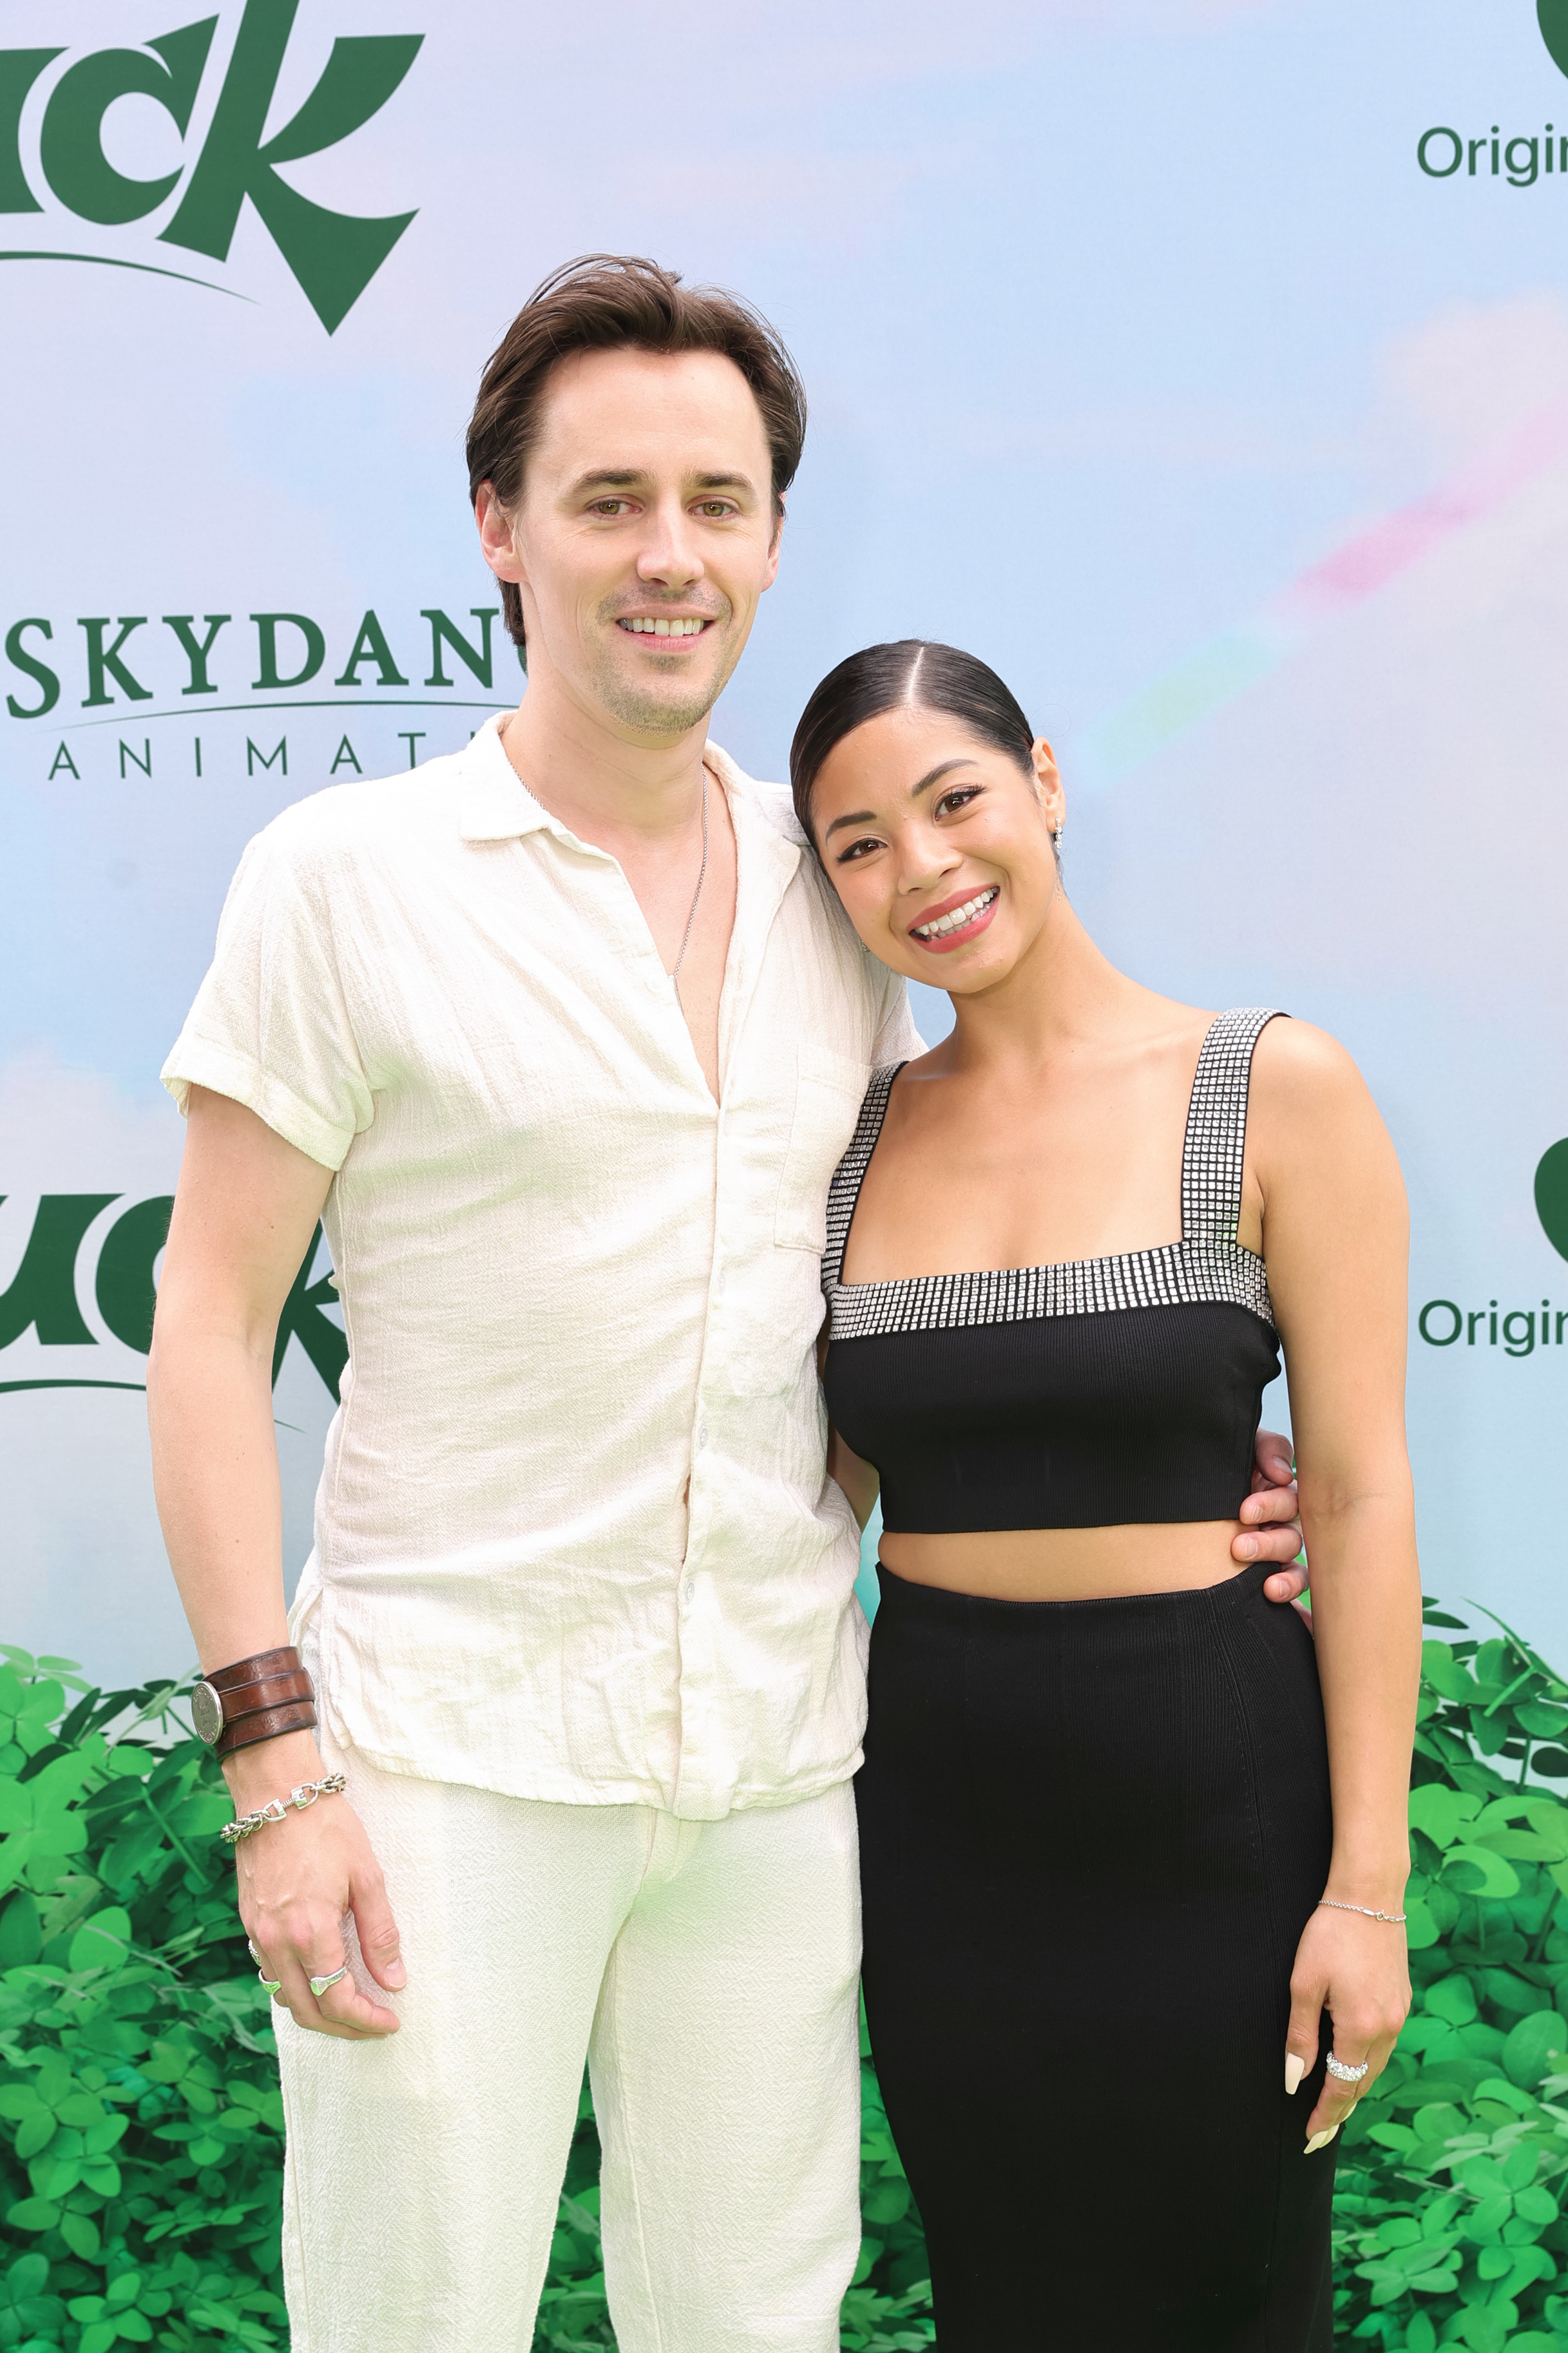 Two people posing, one in a casual white outfit, the other in a black top with a square neckline